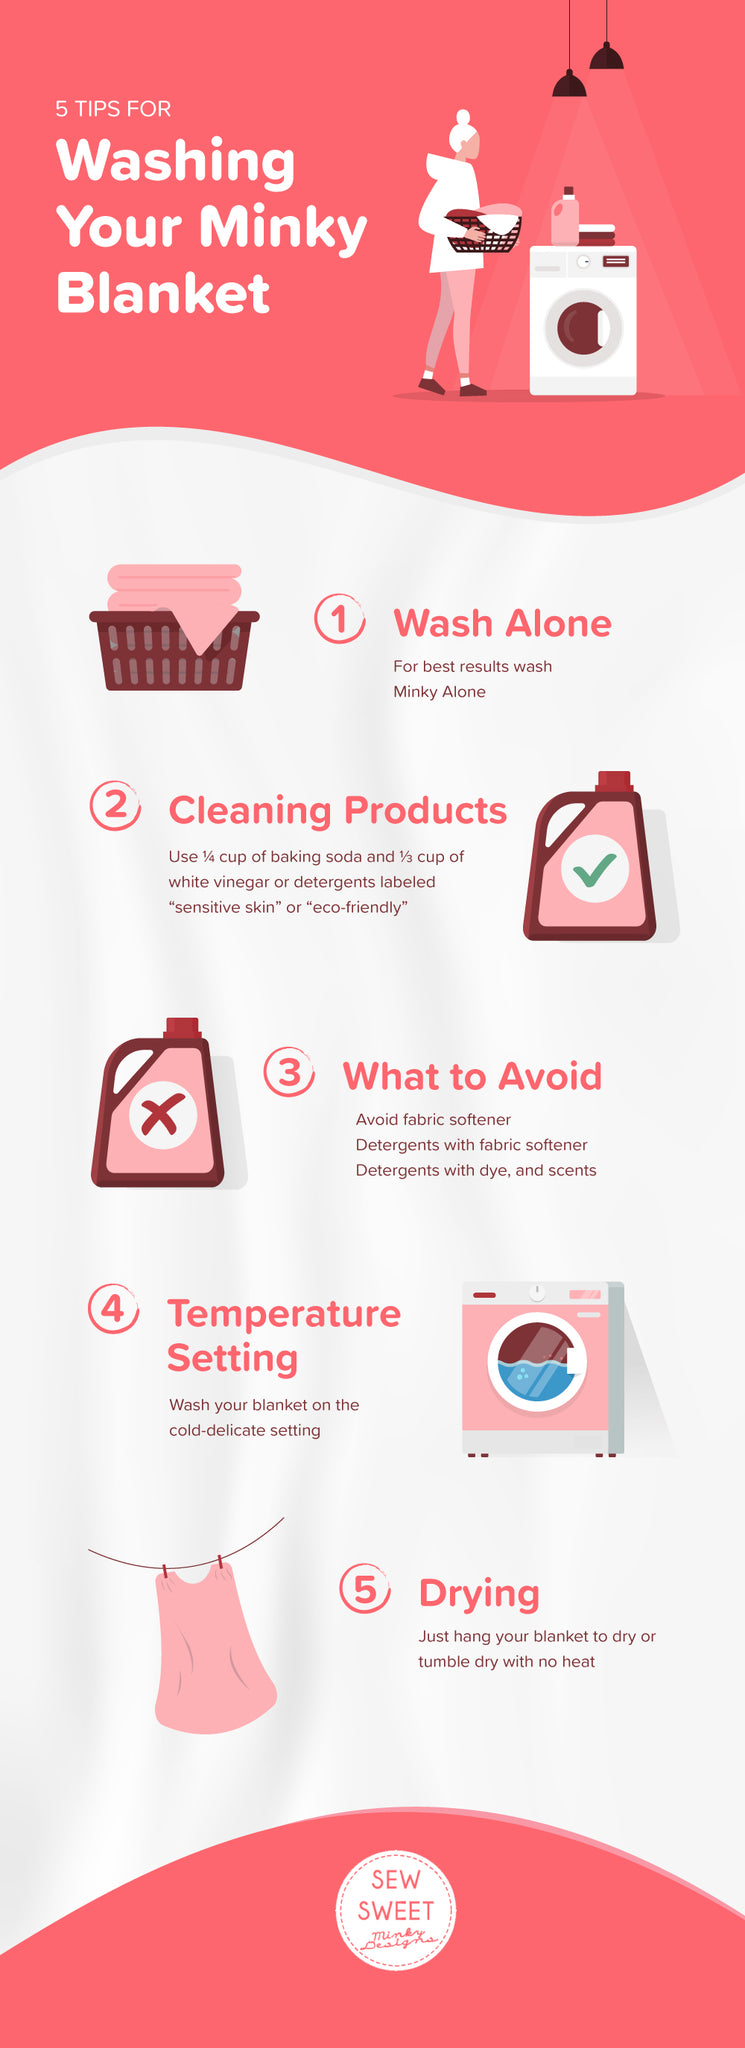 5 Tips for Washing your Minky blanket Infographic